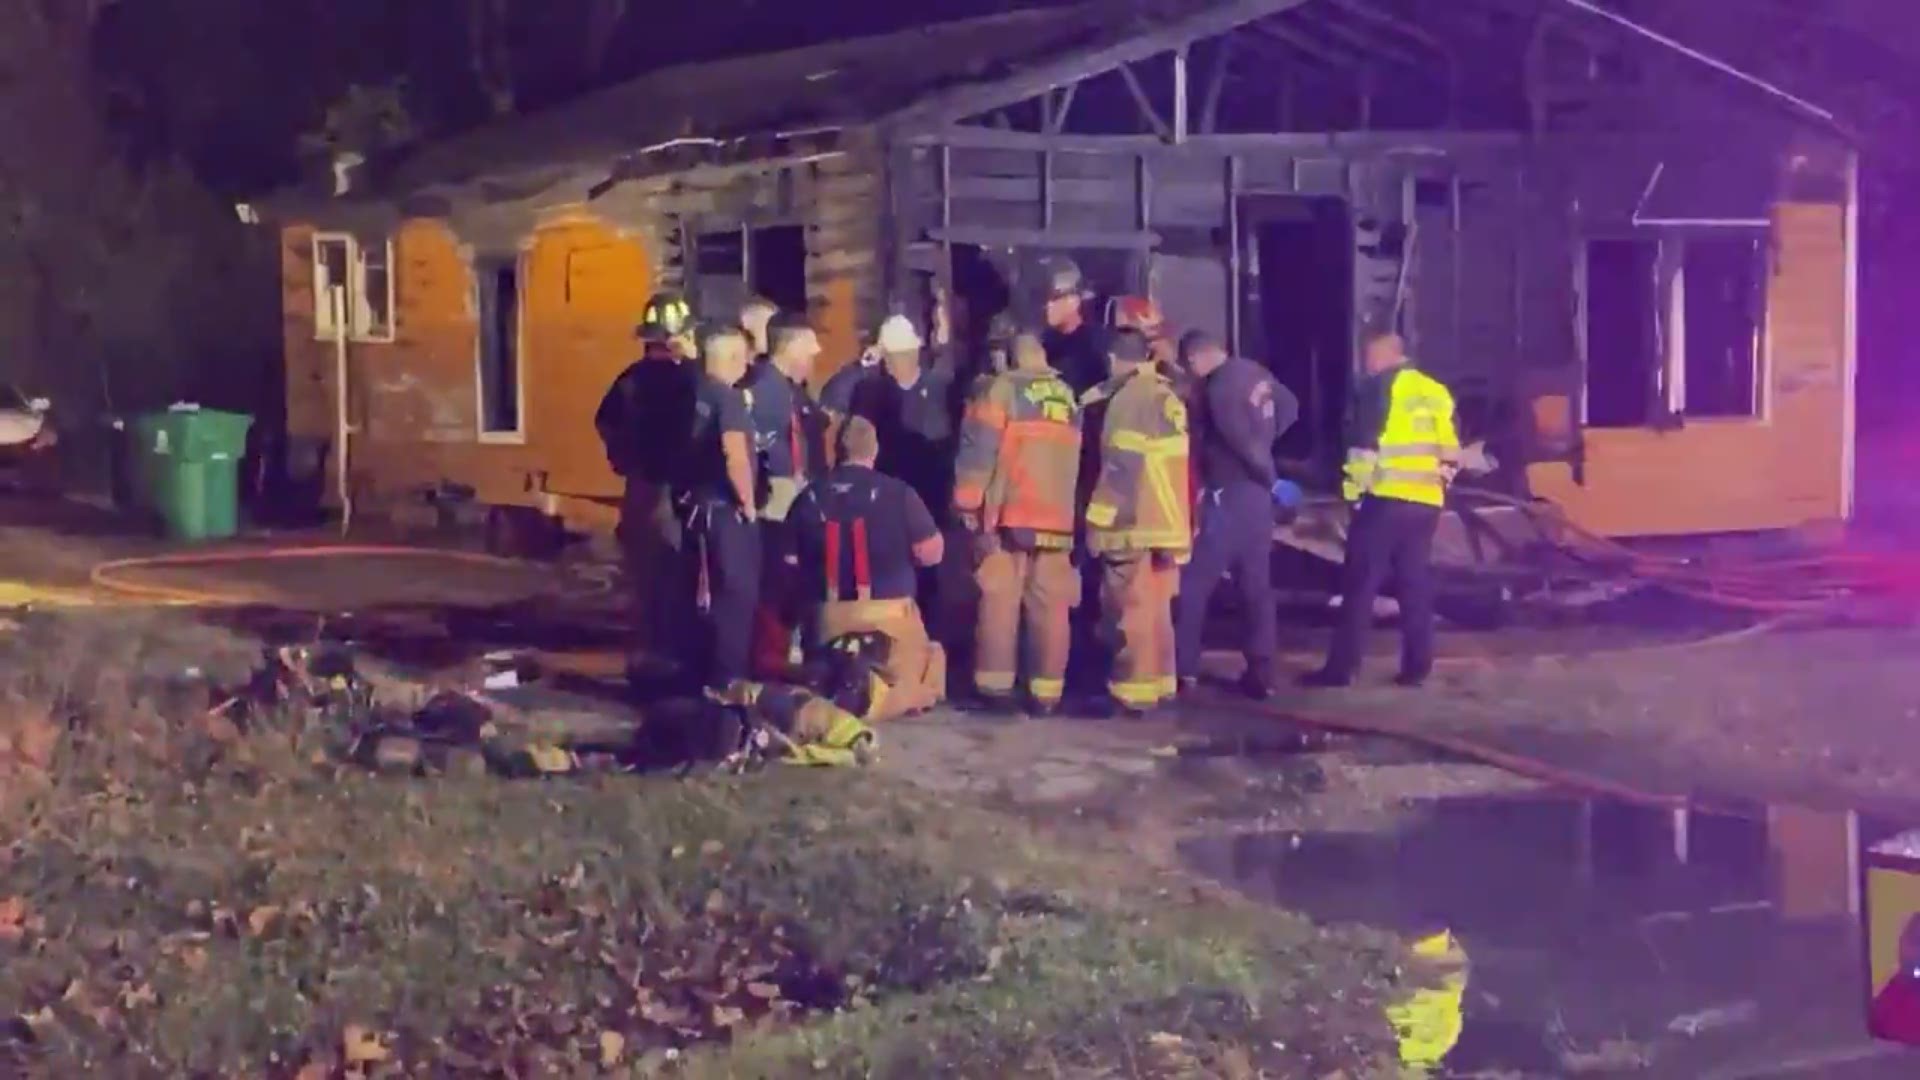 A man was rushed to the hospital after firefighters found him in a burning home. His condition is unknown.